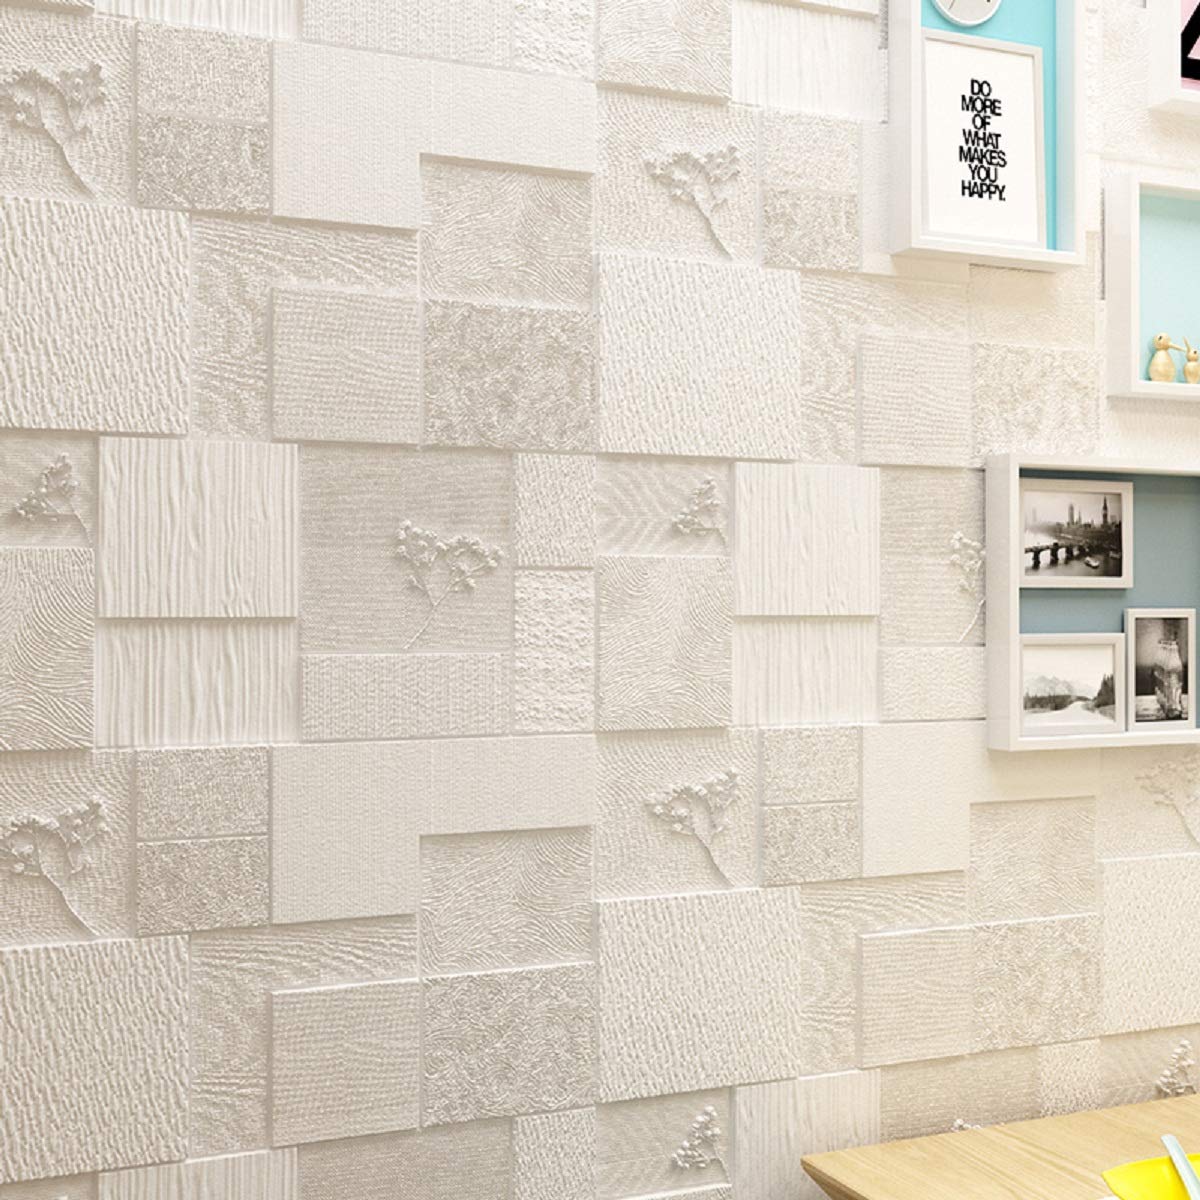 Nasmodo 3D Brick Foam Ceiling Wallpaper for Bedroom Tiles Panel Stickers for Living Room,self-Adhesive Wall for Home Decoration (70 * 70 cm) (4, PUMI)